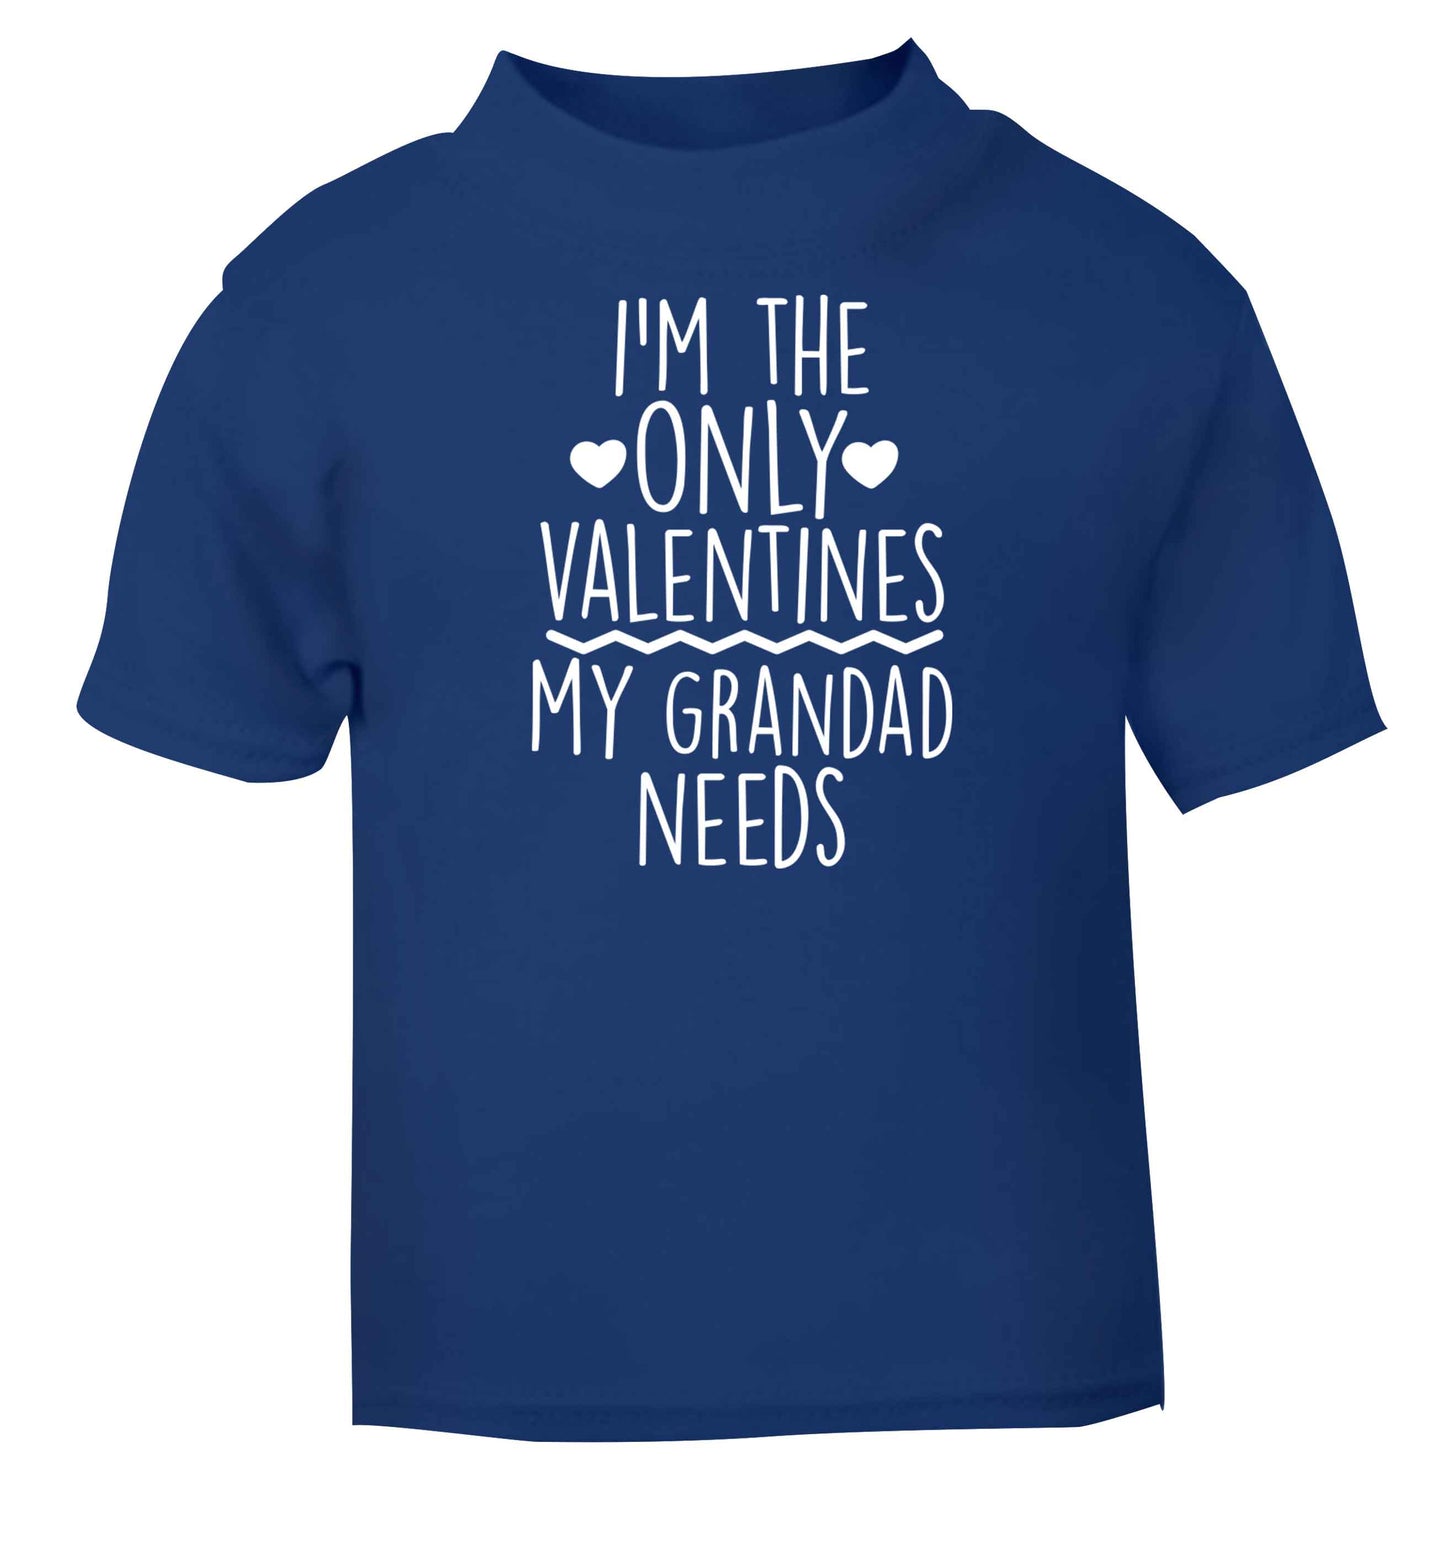 I'm the only valentines my grandad needs blue baby toddler Tshirt 2 Years